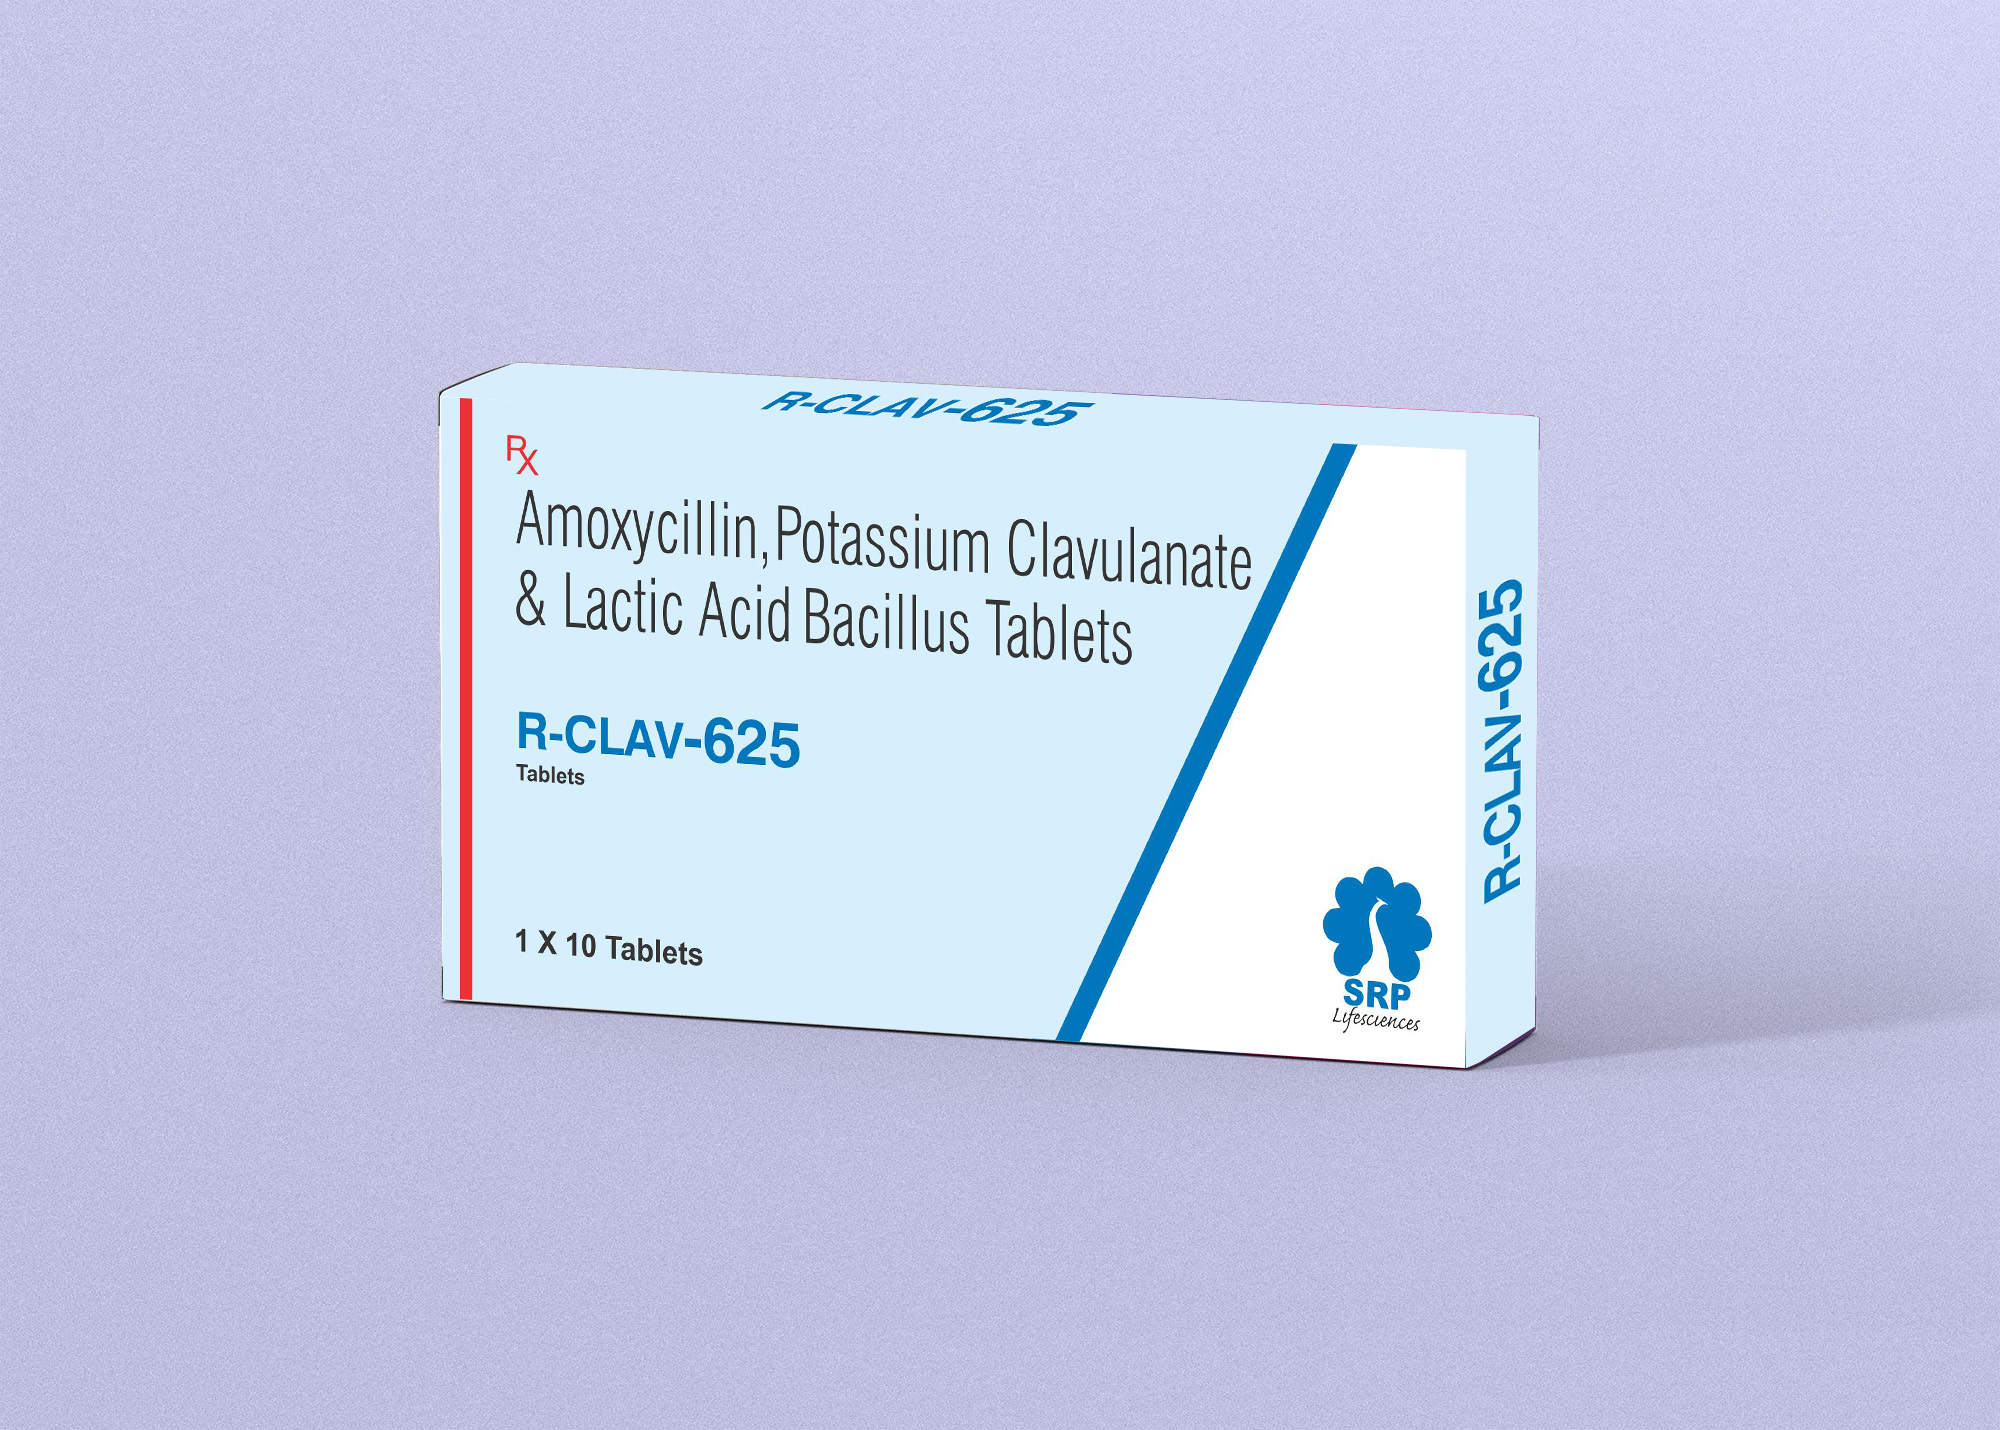 Product Name: R CLAV 625, Compositions of R CLAV 625 are Amoxicillin, Potassium Clavulanate & Lactic Acid Bacillus Tablets - Cynak Healthcare